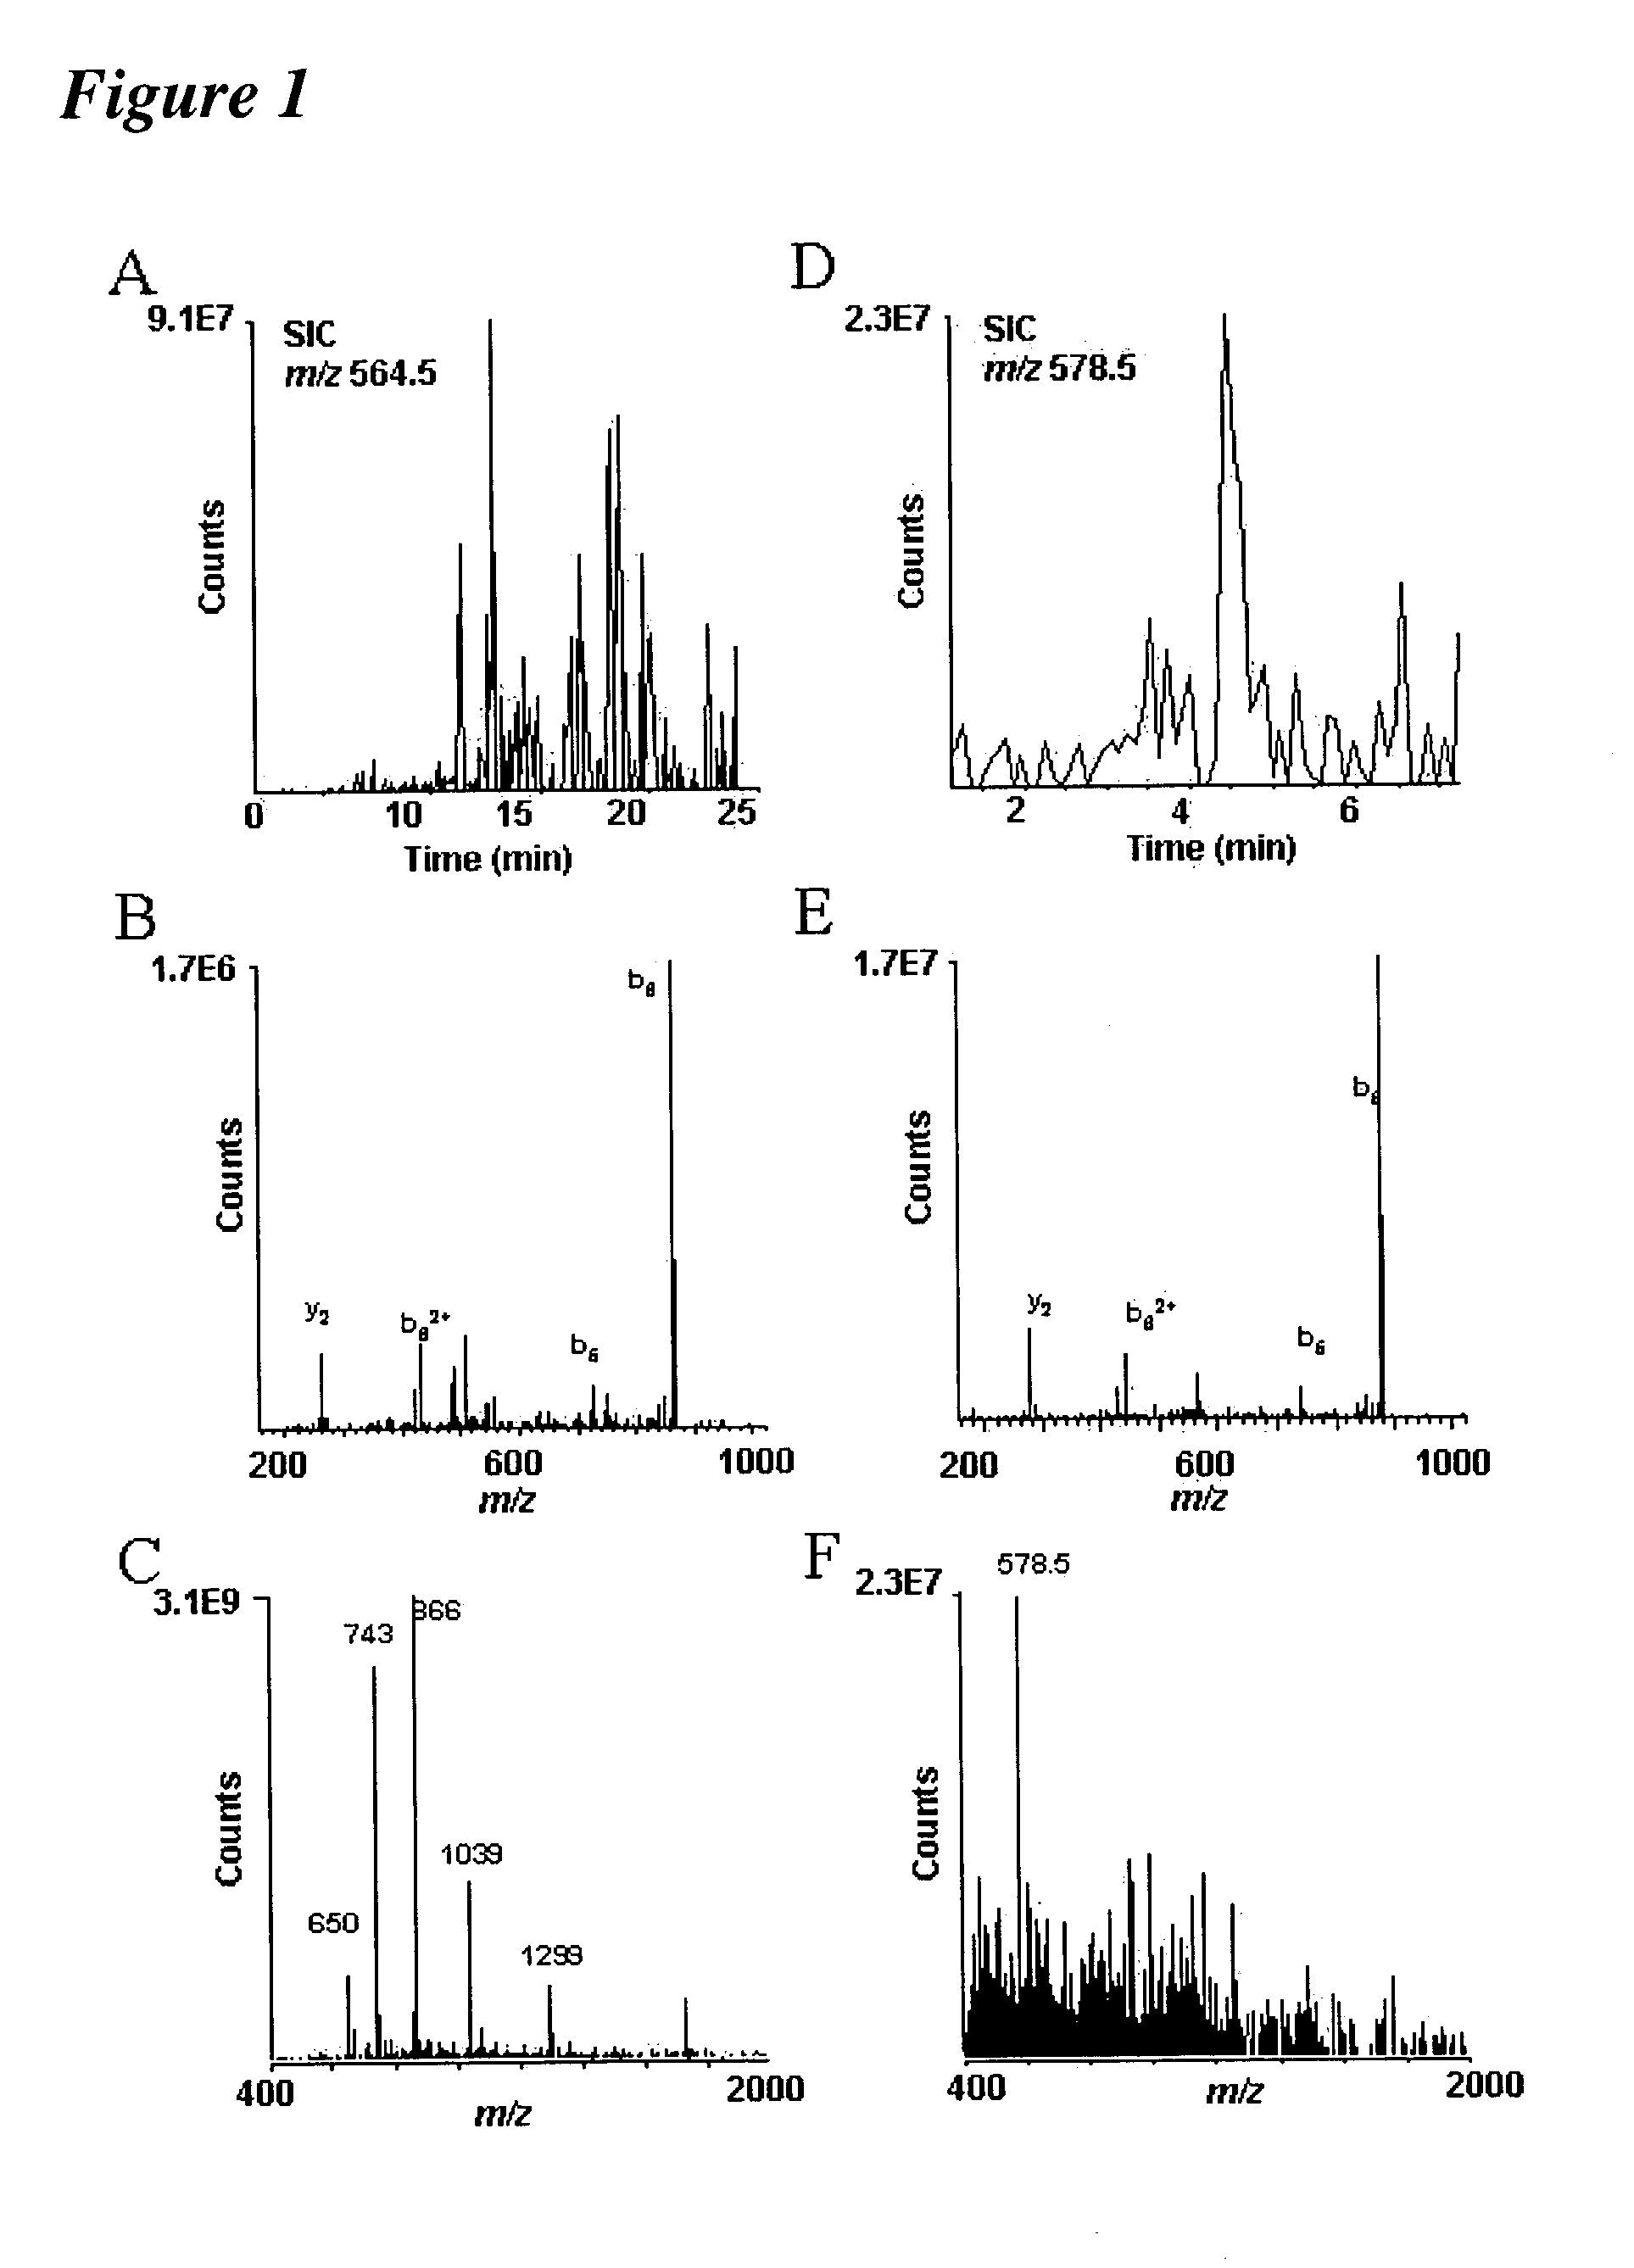 Systems and methods for the analysis of protein phosphorylation